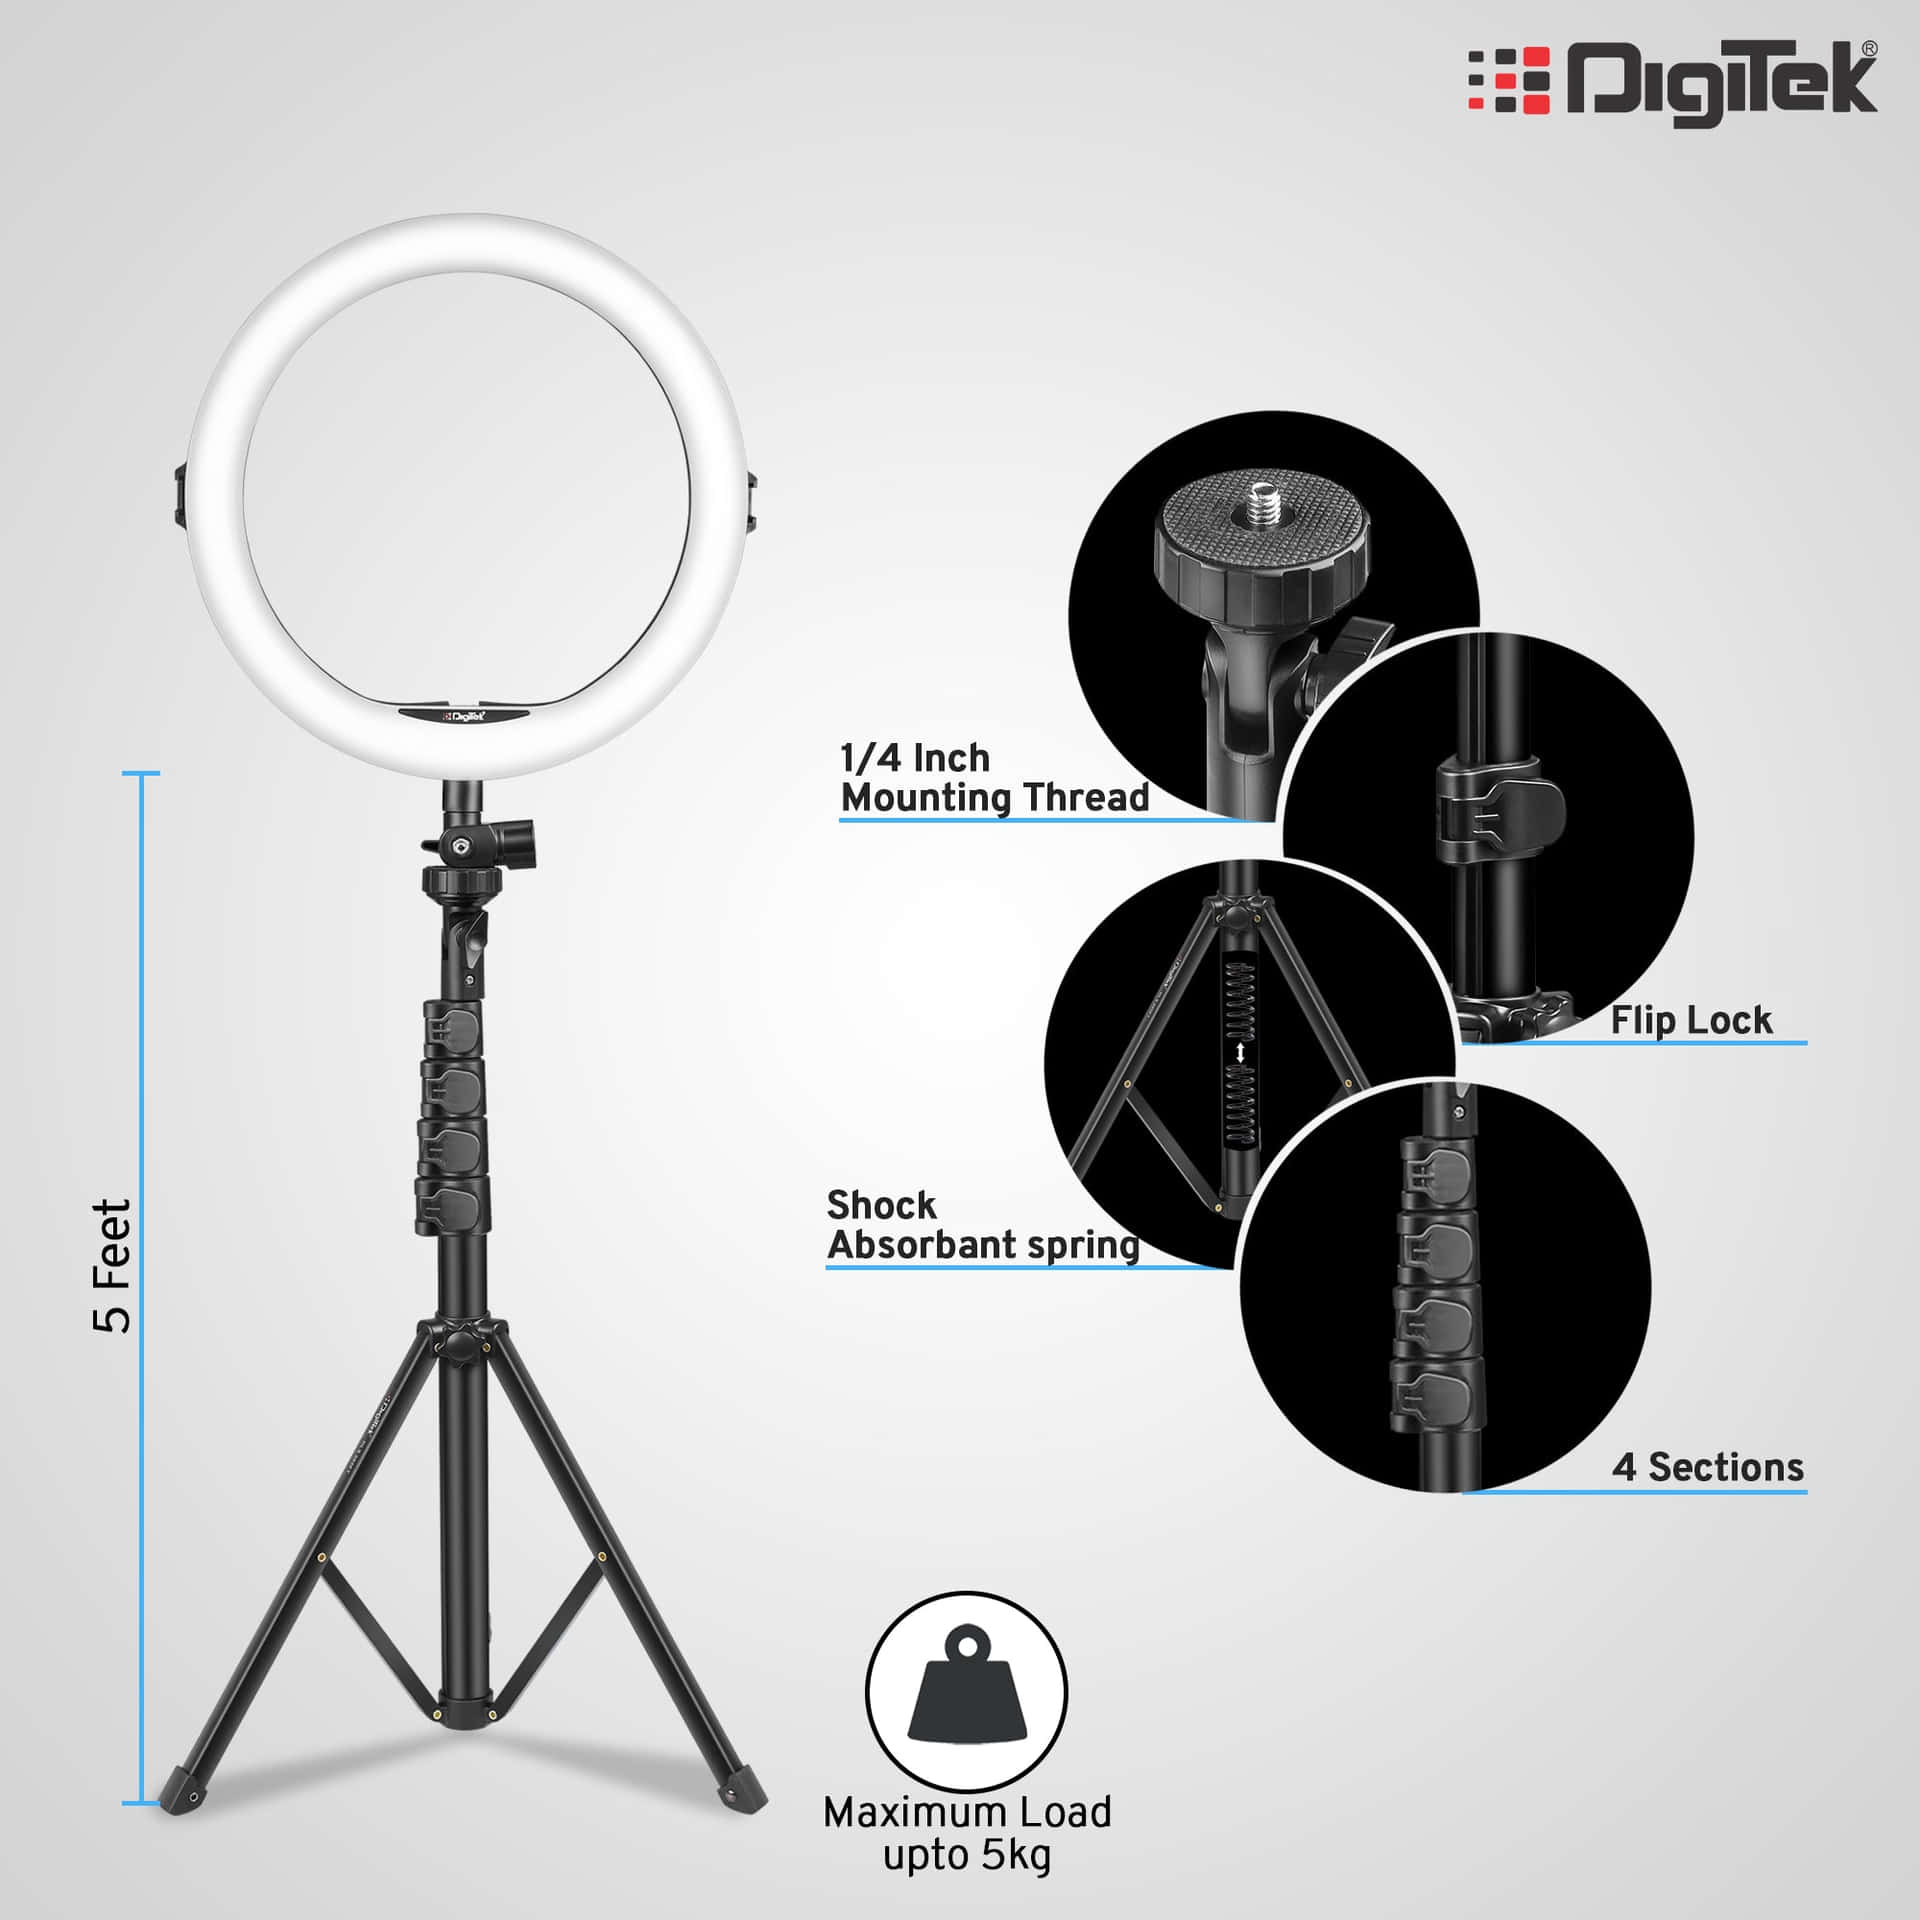 Digitaltek Ring Light With Tripod And Instructions